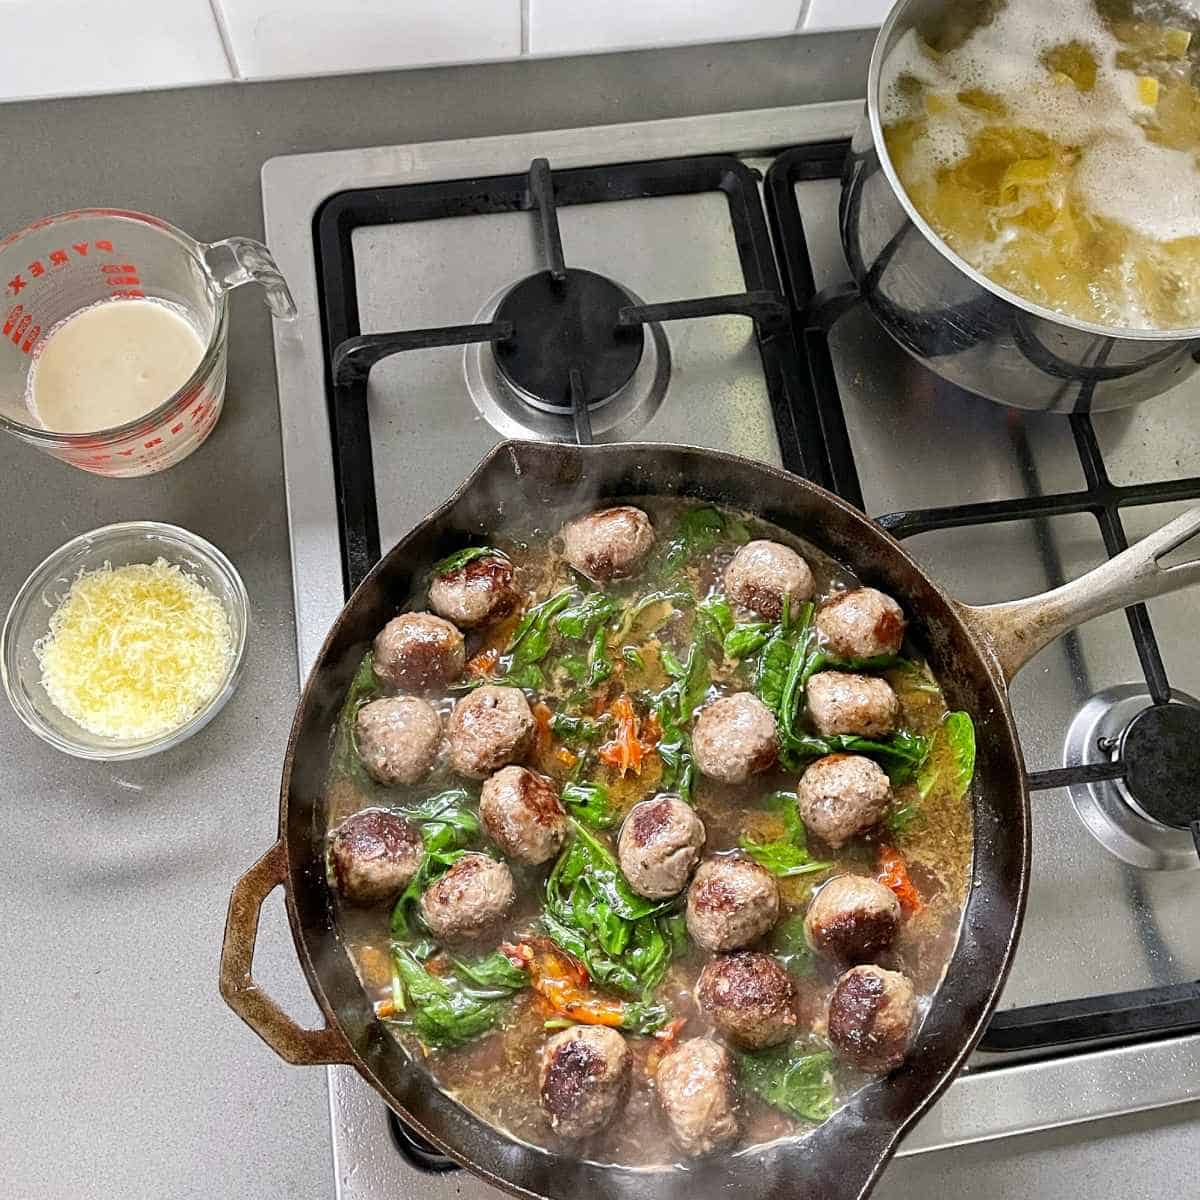 Birds eye view of Tuscan meatballs simmering over a low heat on the element. Saucepan of boiling water and pasta cooking with a glass jug of cream and small glass bowl of cheese sitting on a grey bench top